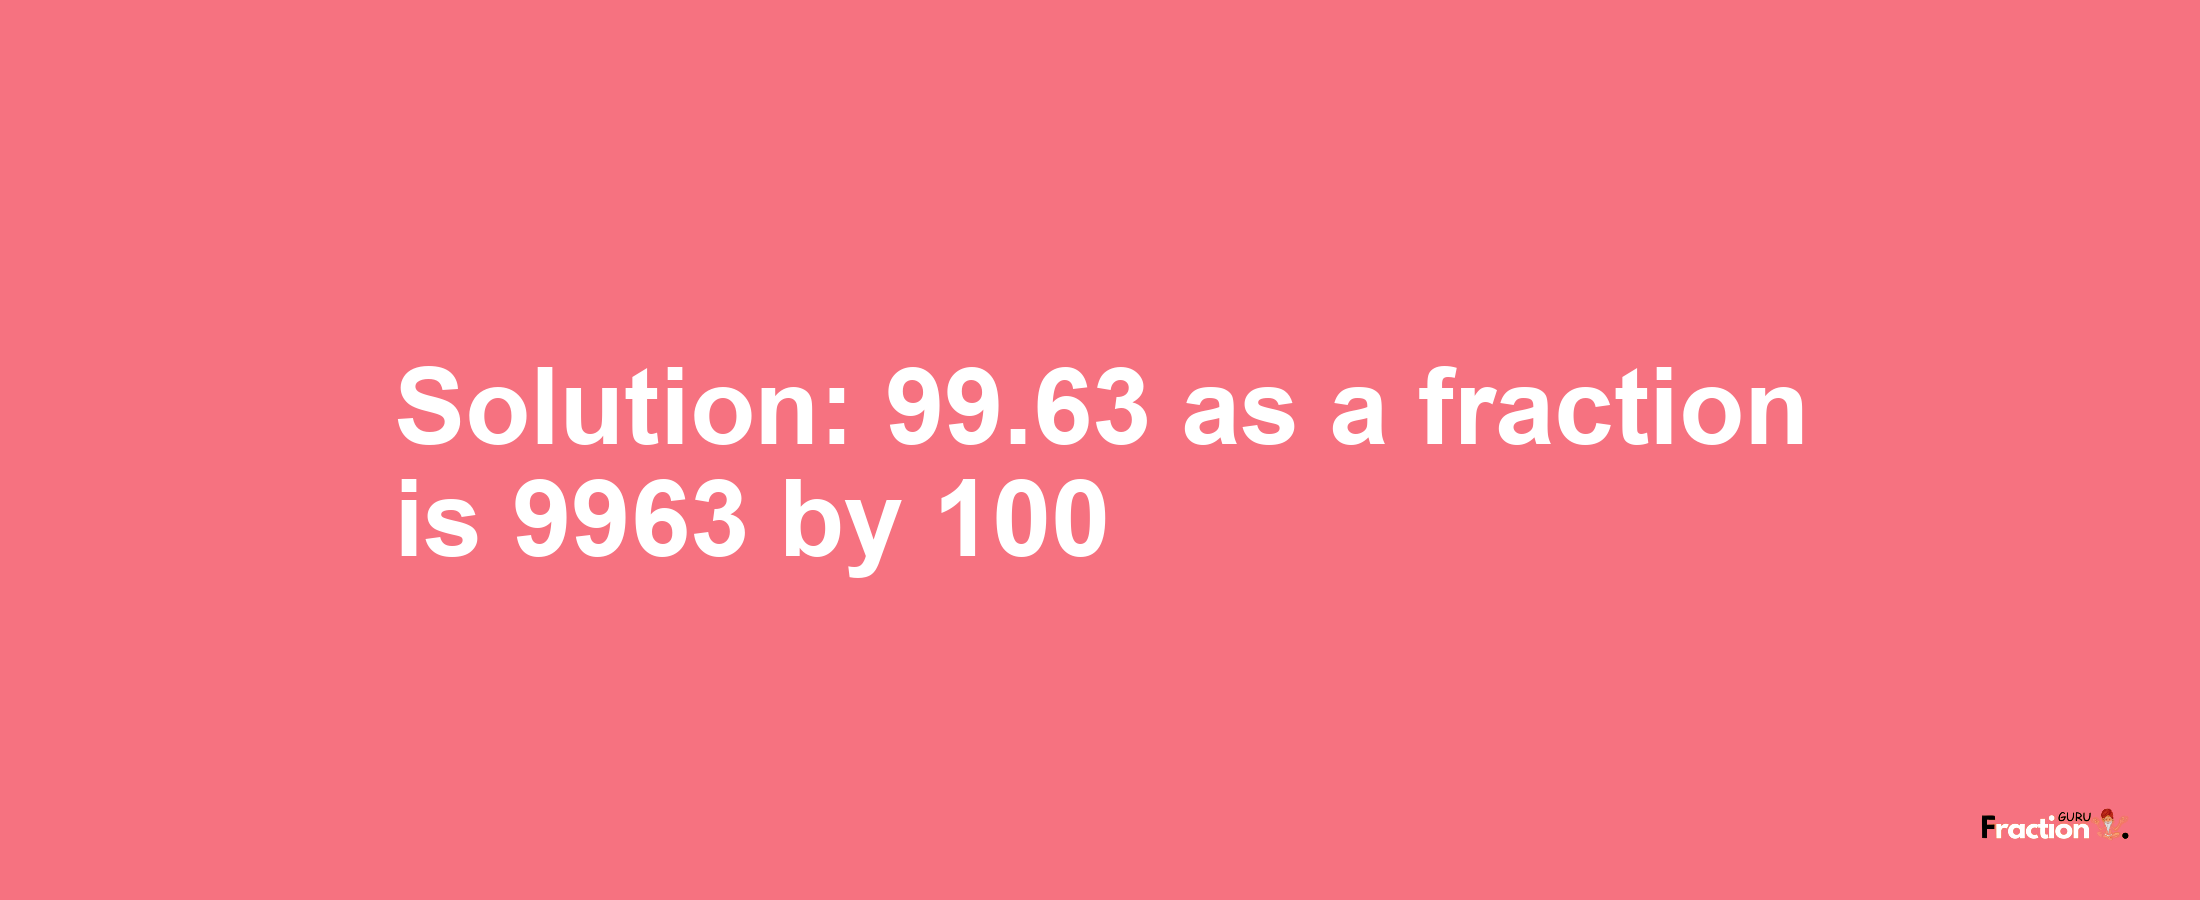 Solution:99.63 as a fraction is 9963/100